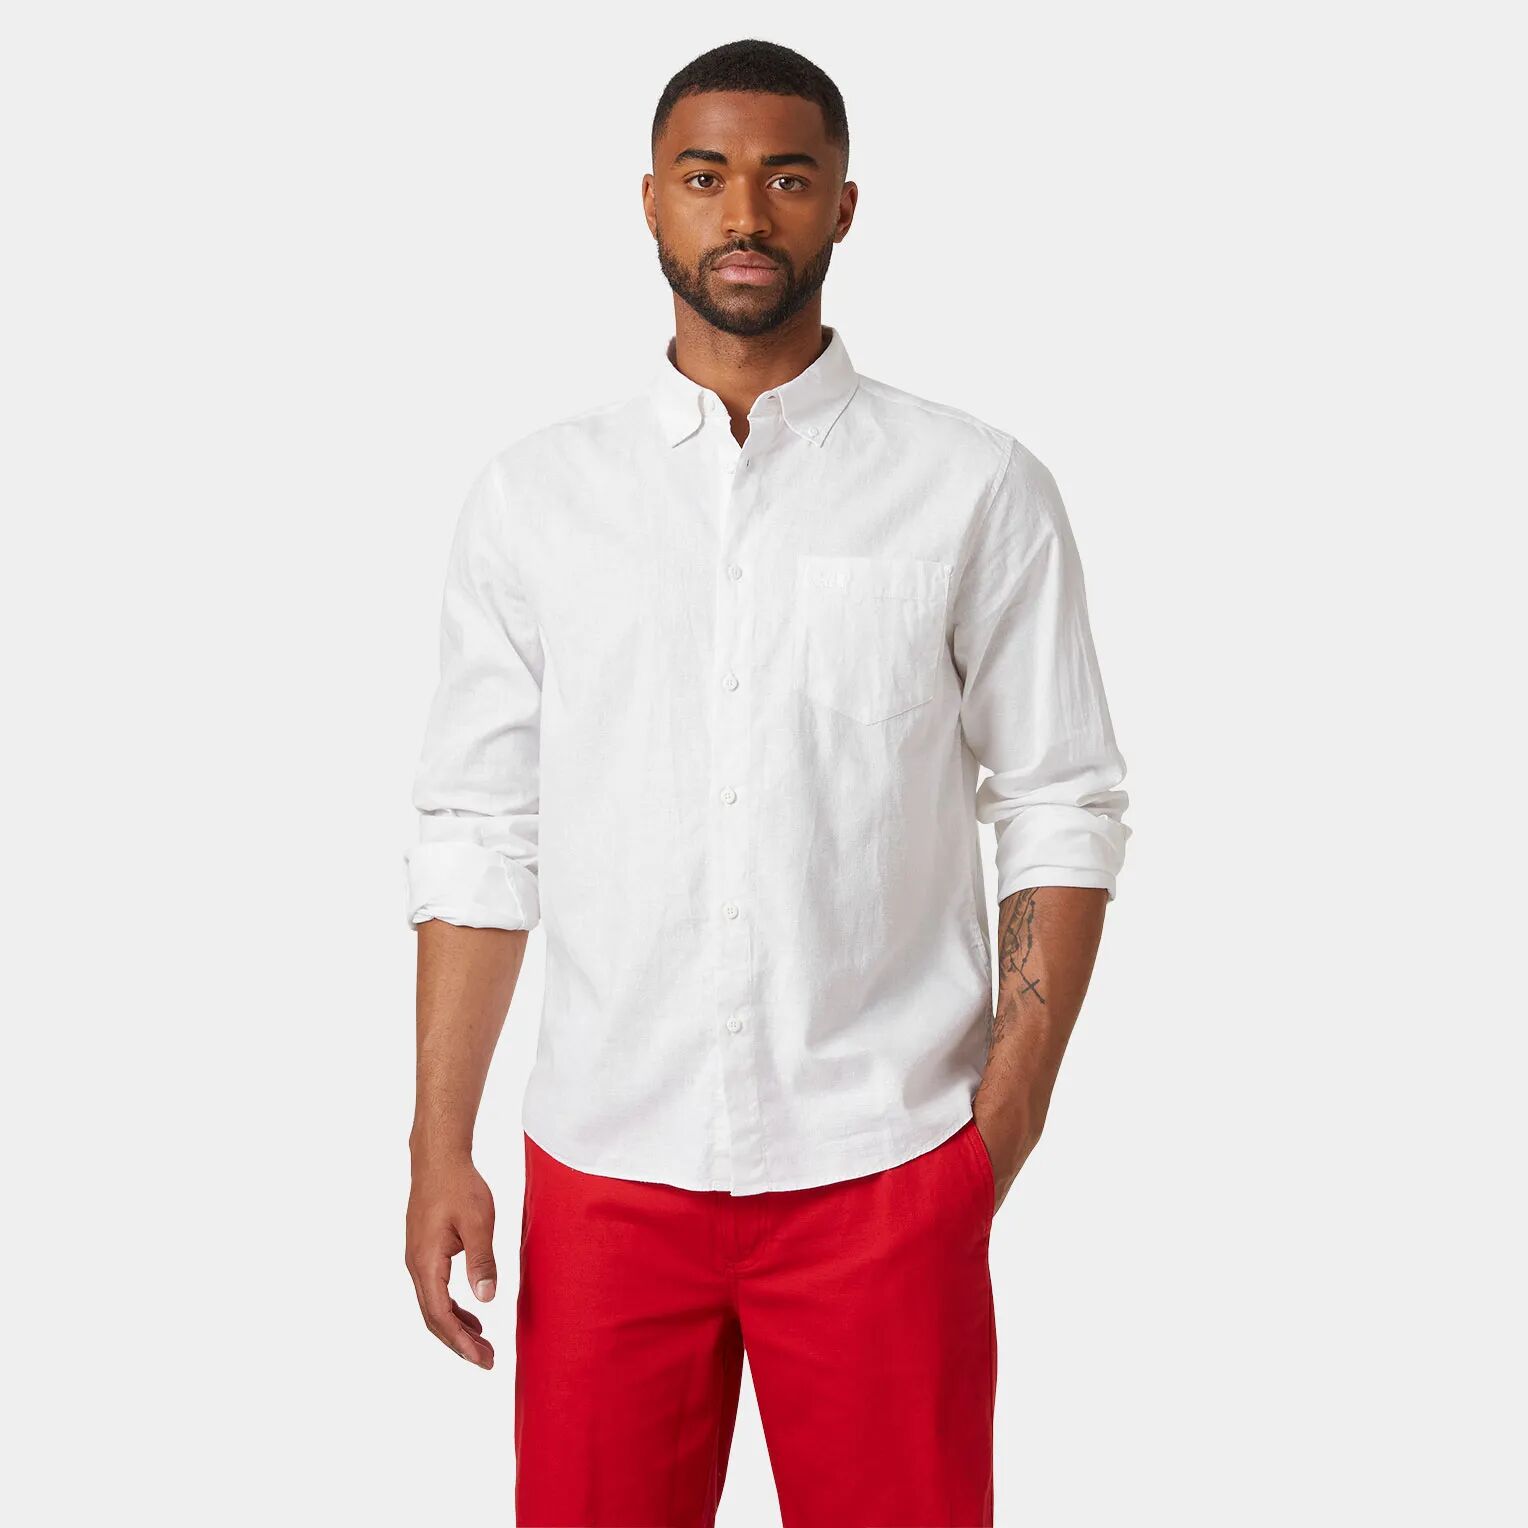 Helly Hansen Men's Club Comfortable And Casual Shirt White M - White - Male